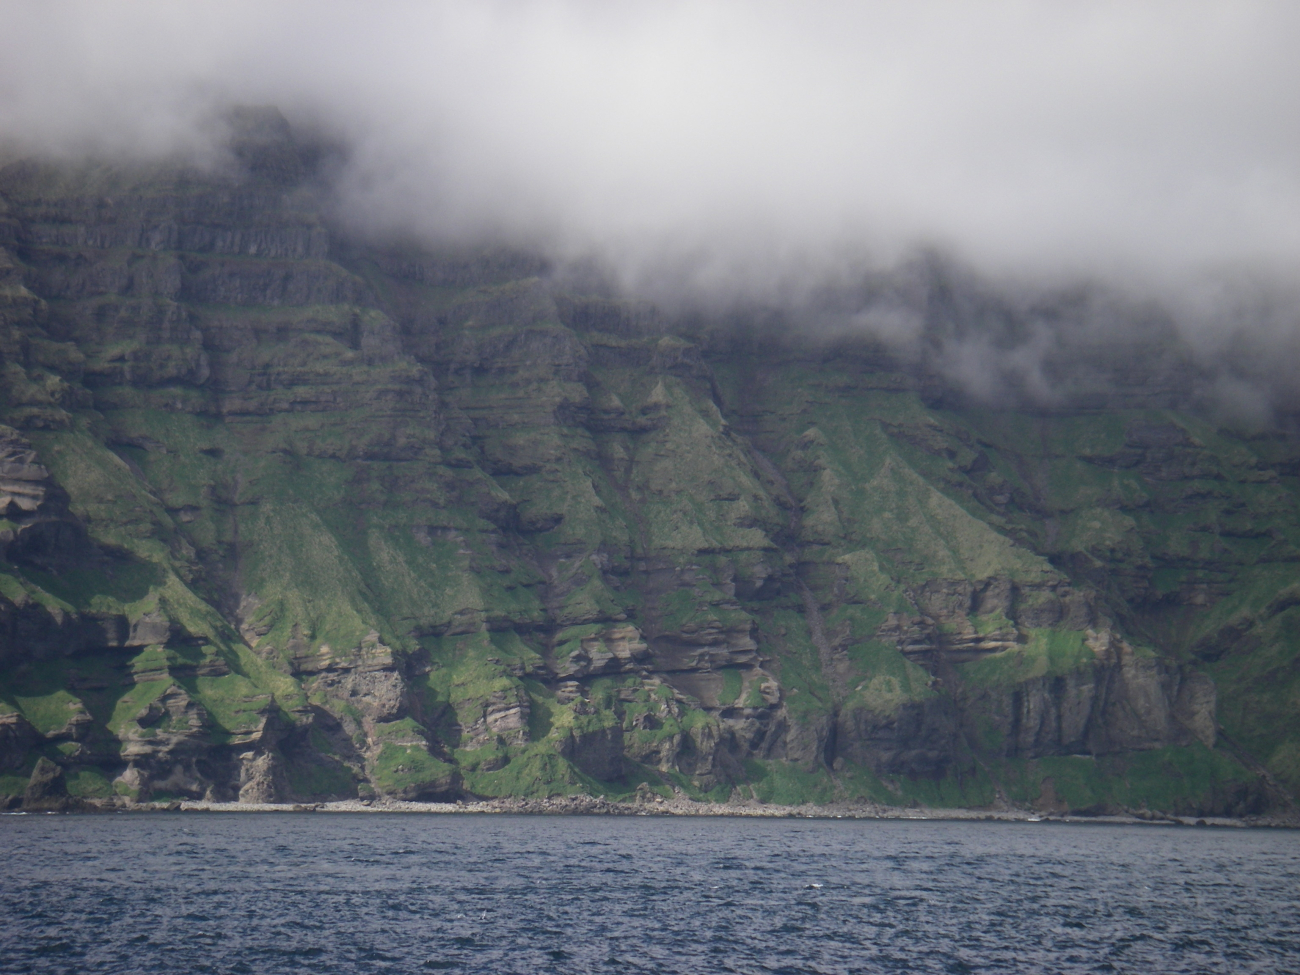 Layer upon layer of volcanic flows formed this cliff on Unimak Island